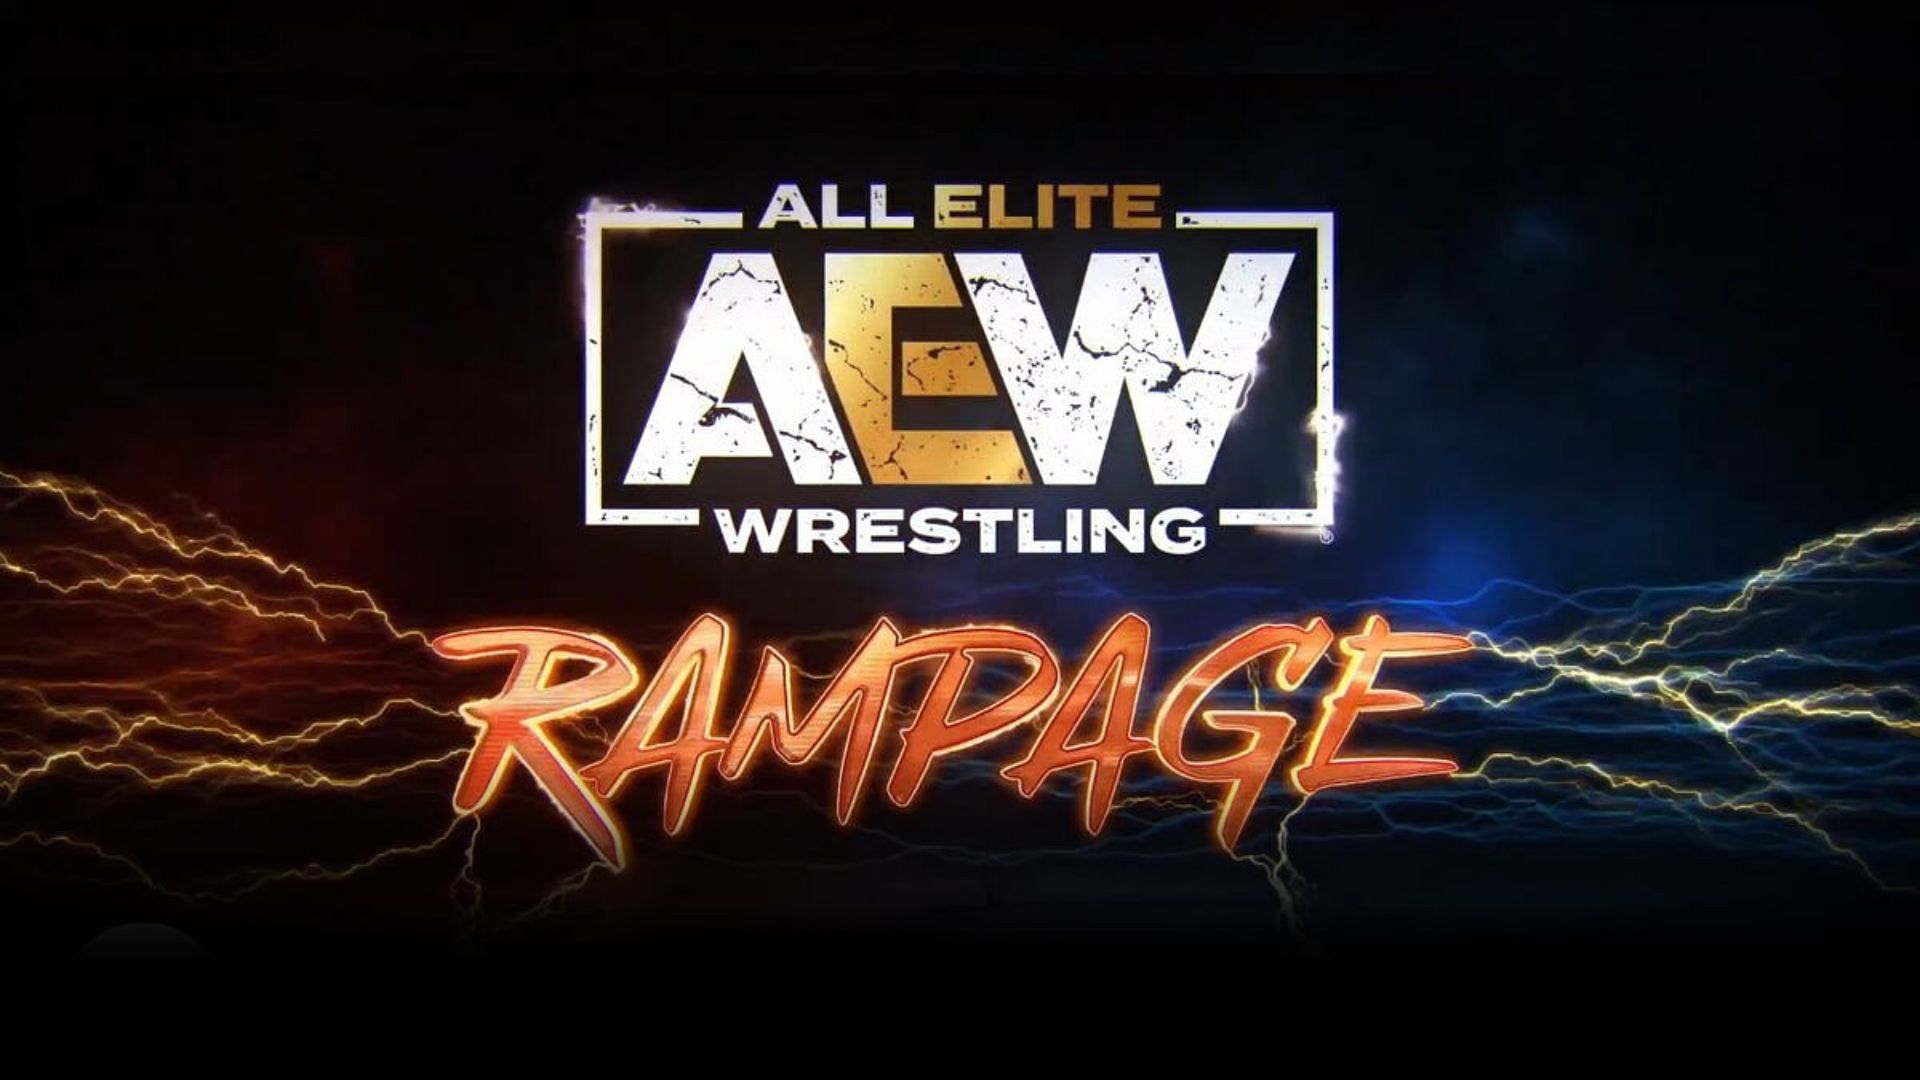 AEW Rampage is the weekly Friday show of All Elite Wrestling